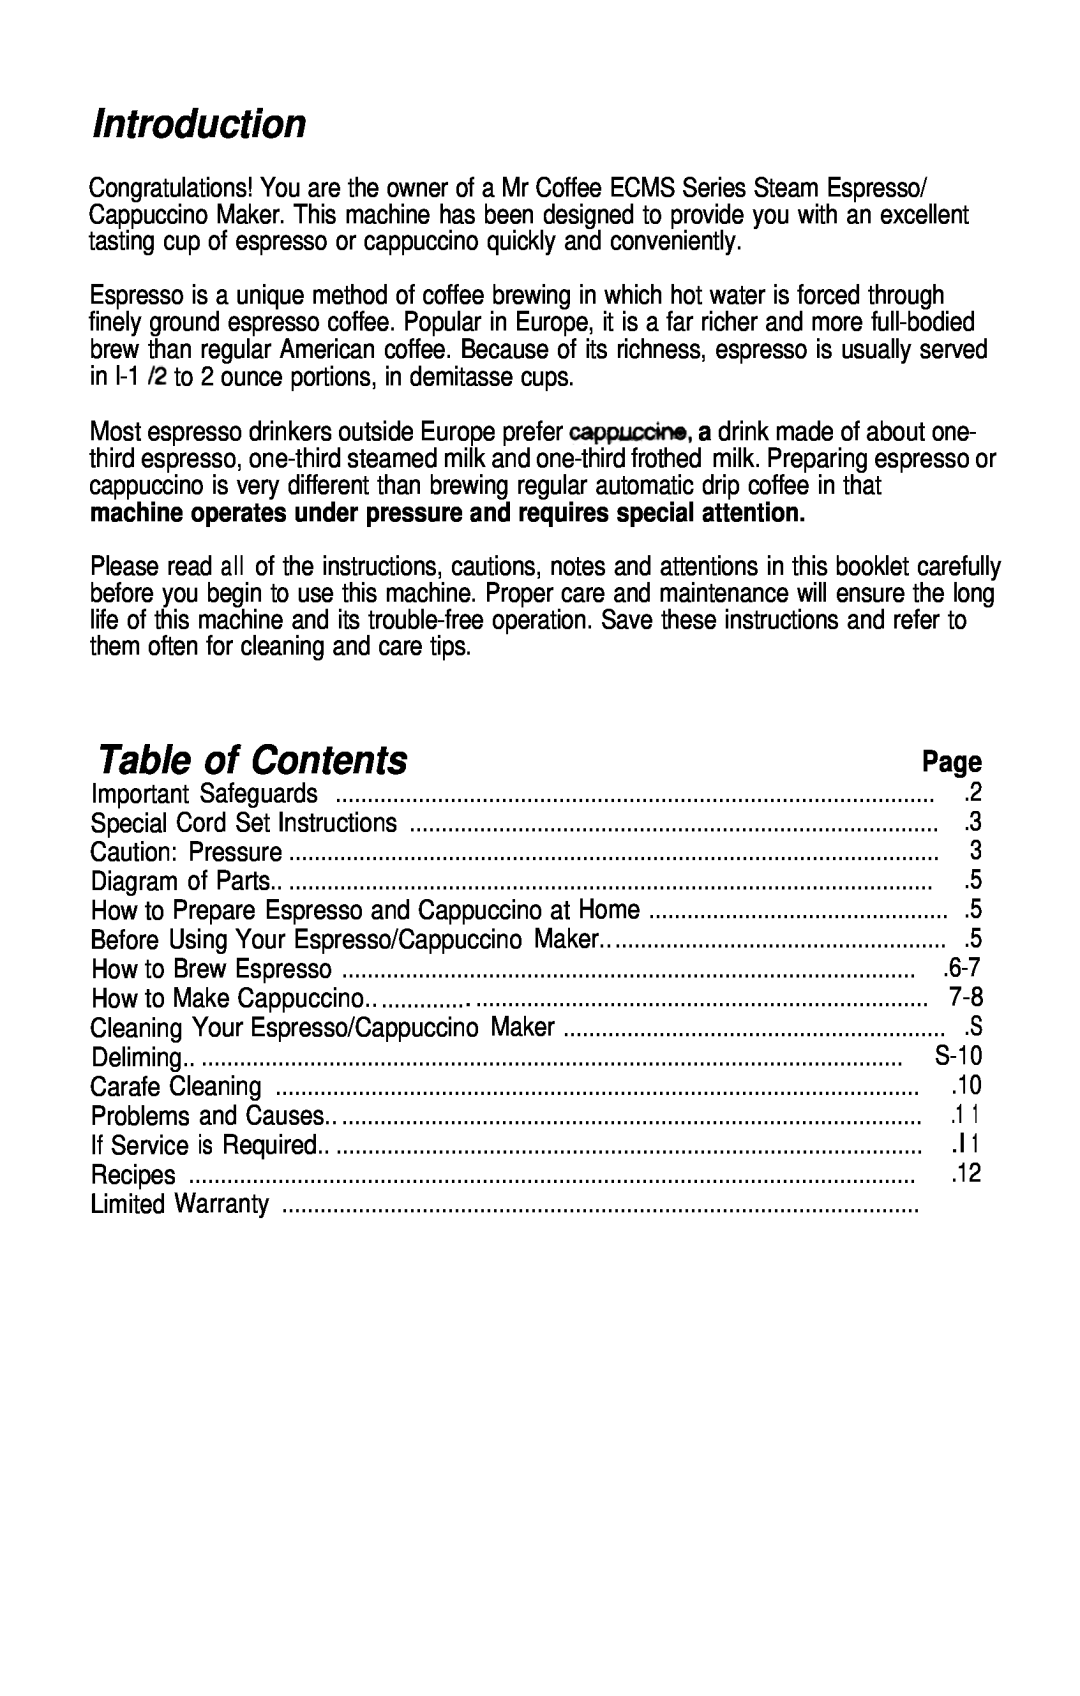 Mr. Coffee ECM9 manual Introduction, Table of Contents, Page 